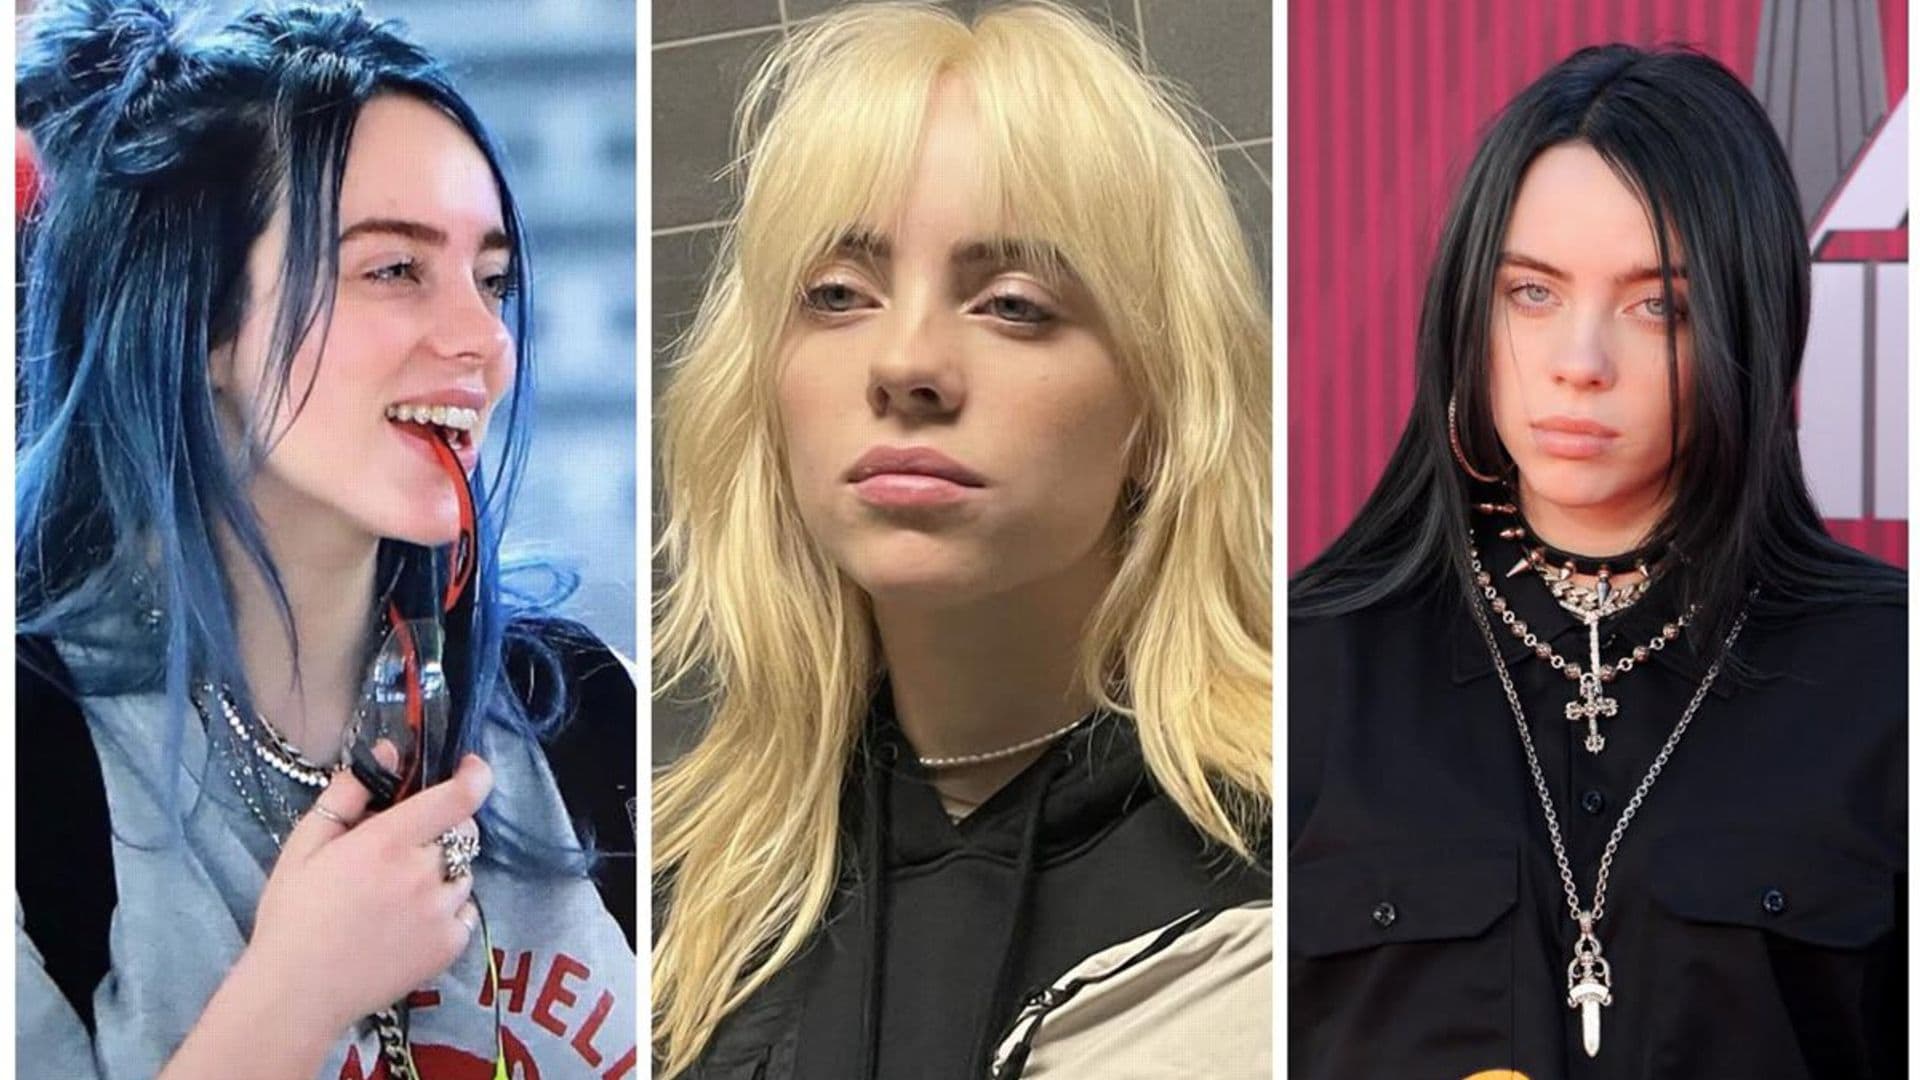 Photographic proof that Billie Eilish can rock any hair color